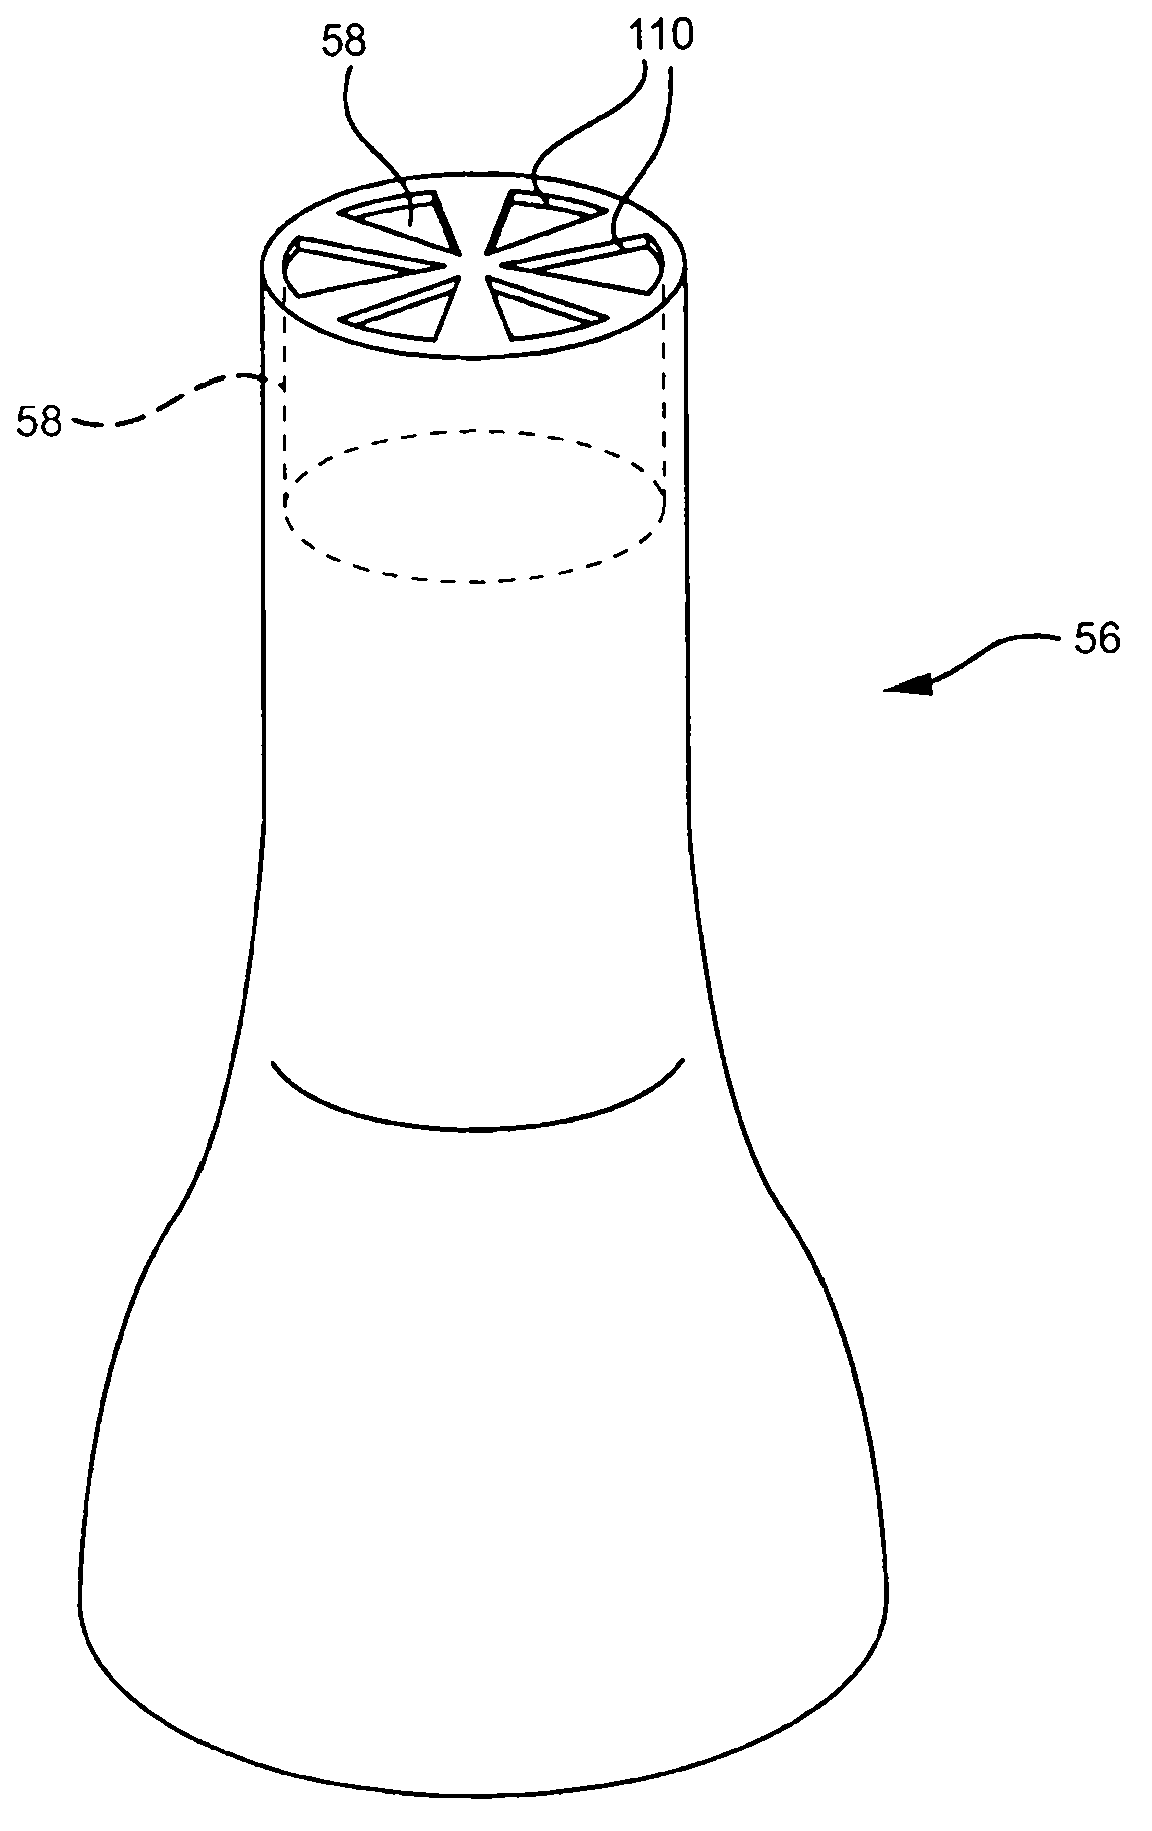 Systems and methods for providing a closed venting hazardous drug IV set